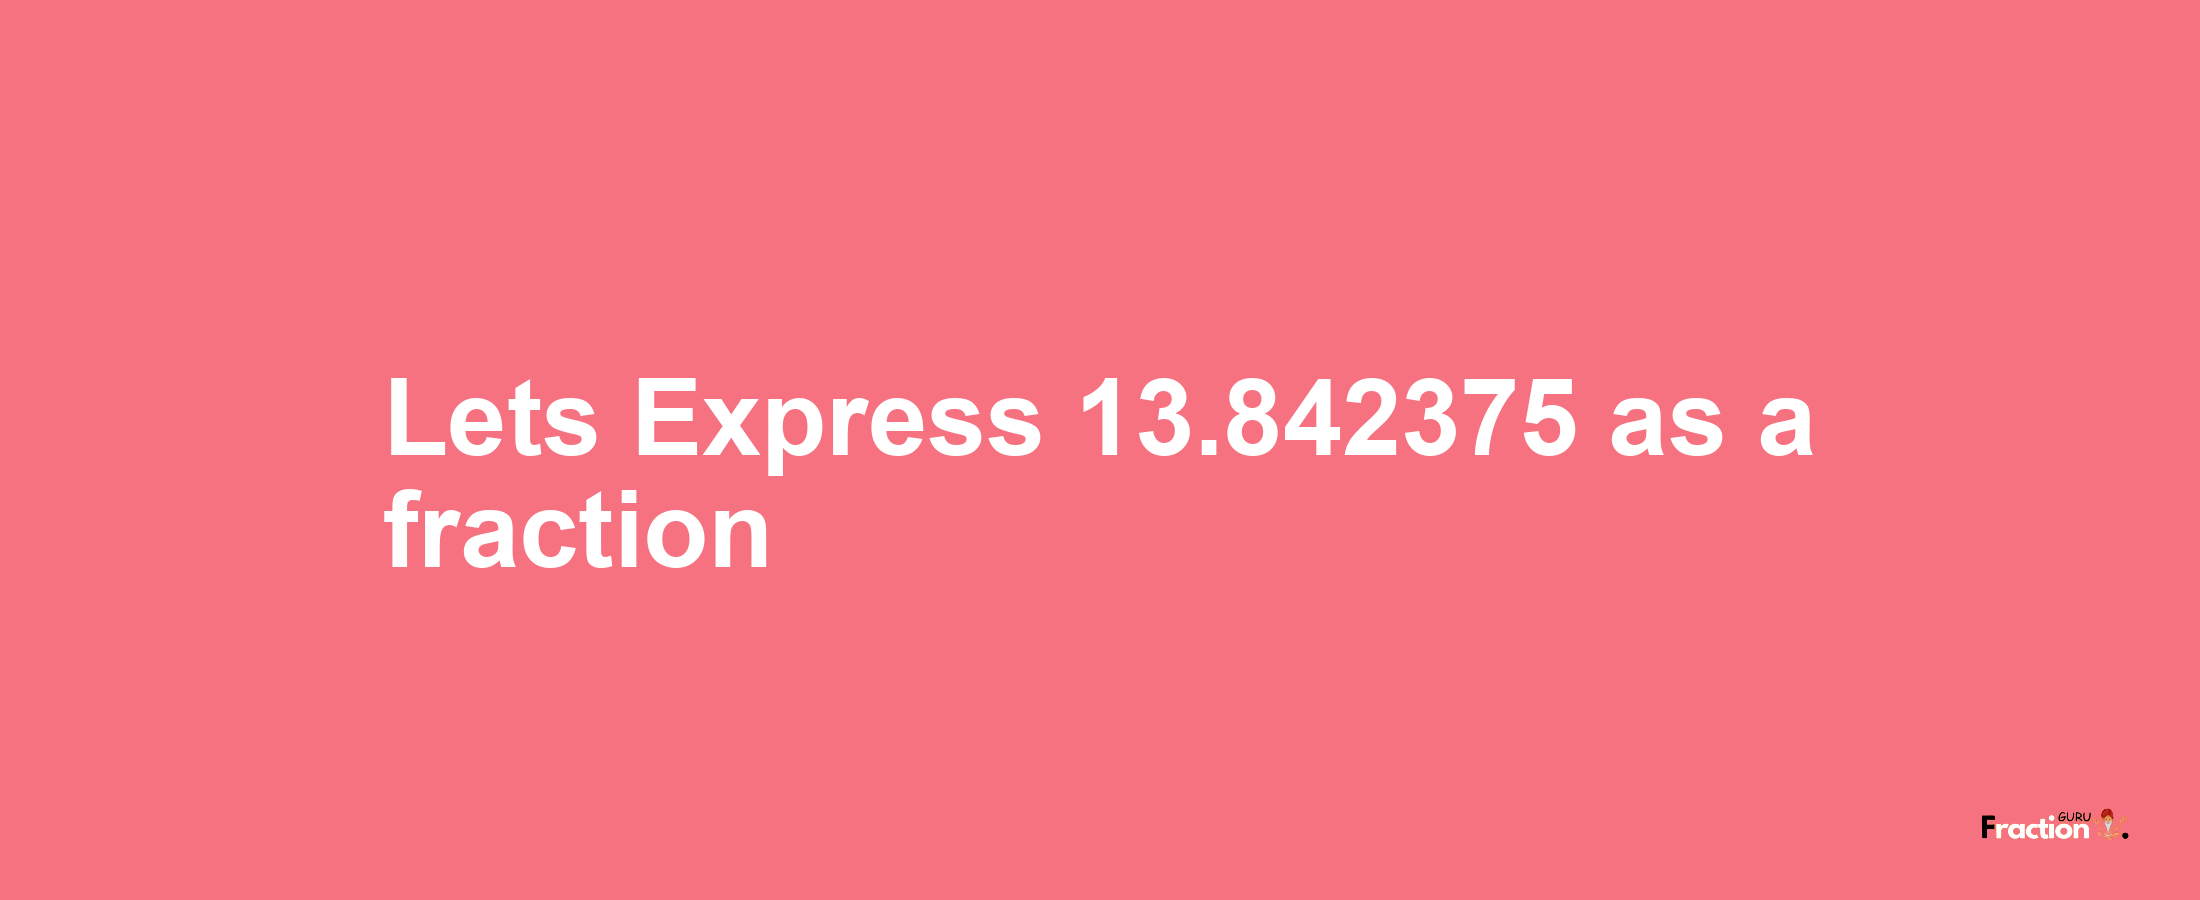 Lets Express 13.842375 as afraction